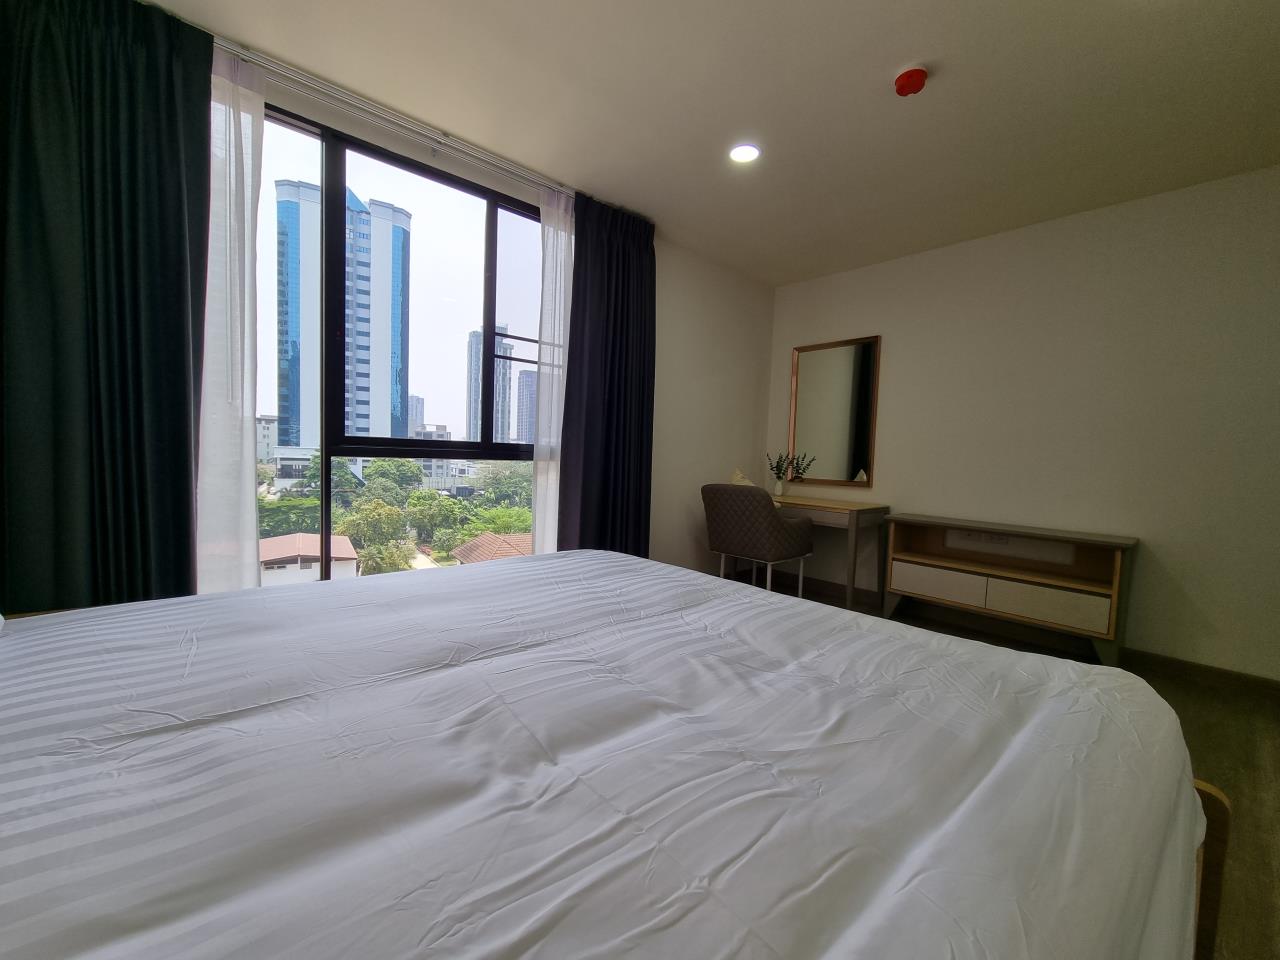 Japanthai Property Agency's *Serene 57* Brand-new property in great location in Thonglor.  10